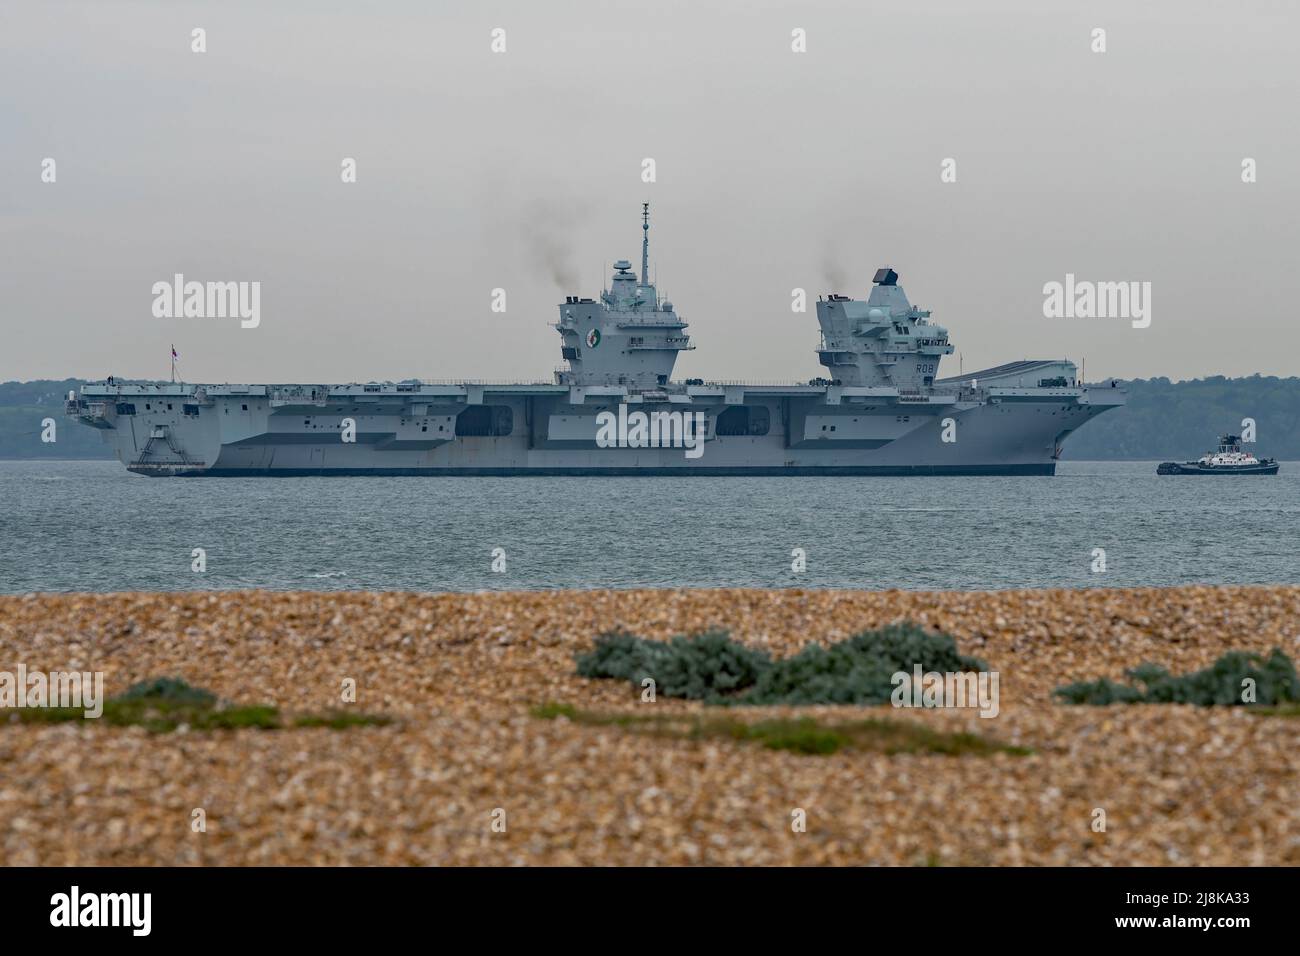 The aircraft carrier HMS Queen Elizabeth (R08) seen proceeding slowly through The Solent, UK on 15/5/2022 towards an anchorage in Stokes Bay. Stock Photo